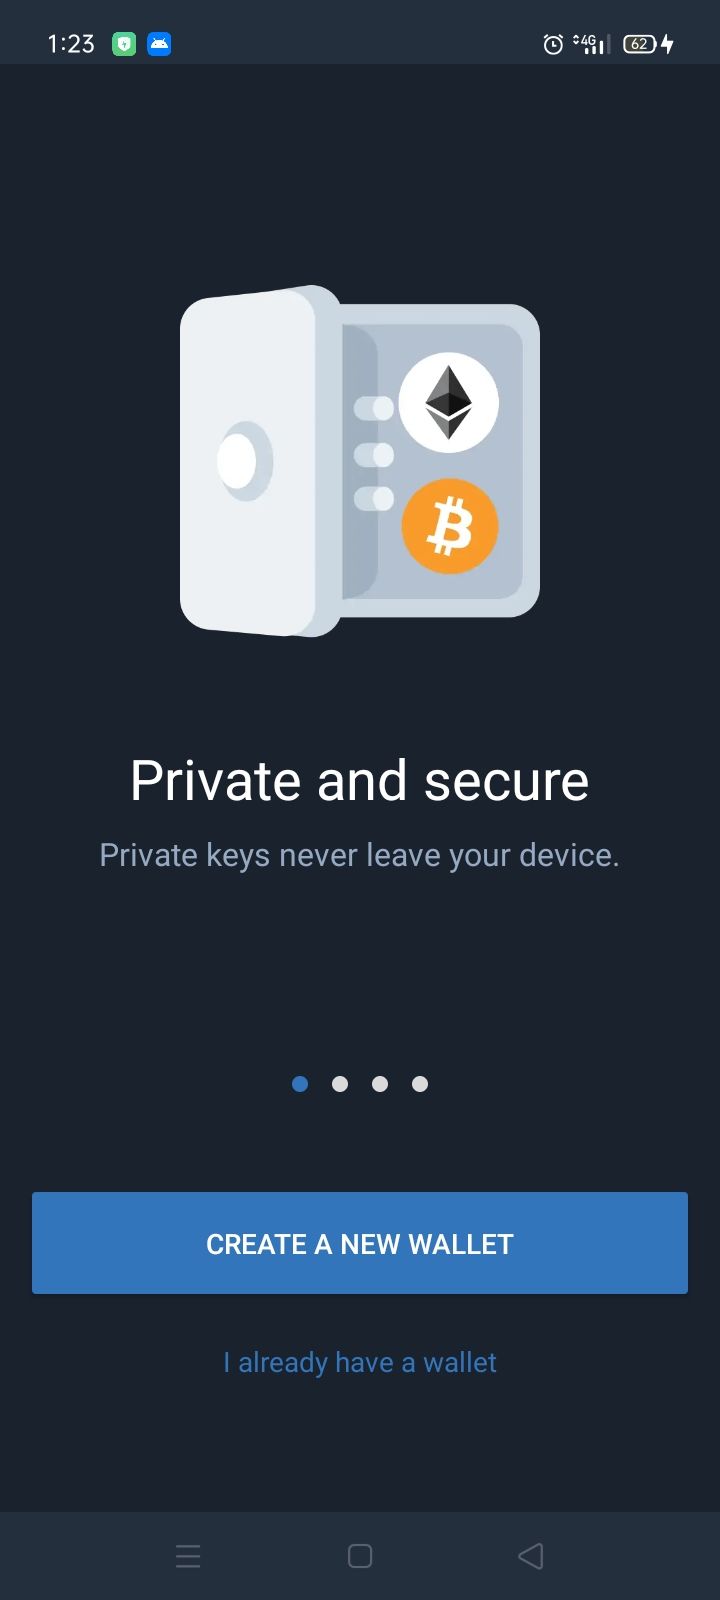 Screenshot of trust wallet asking to create new wallet or sign in